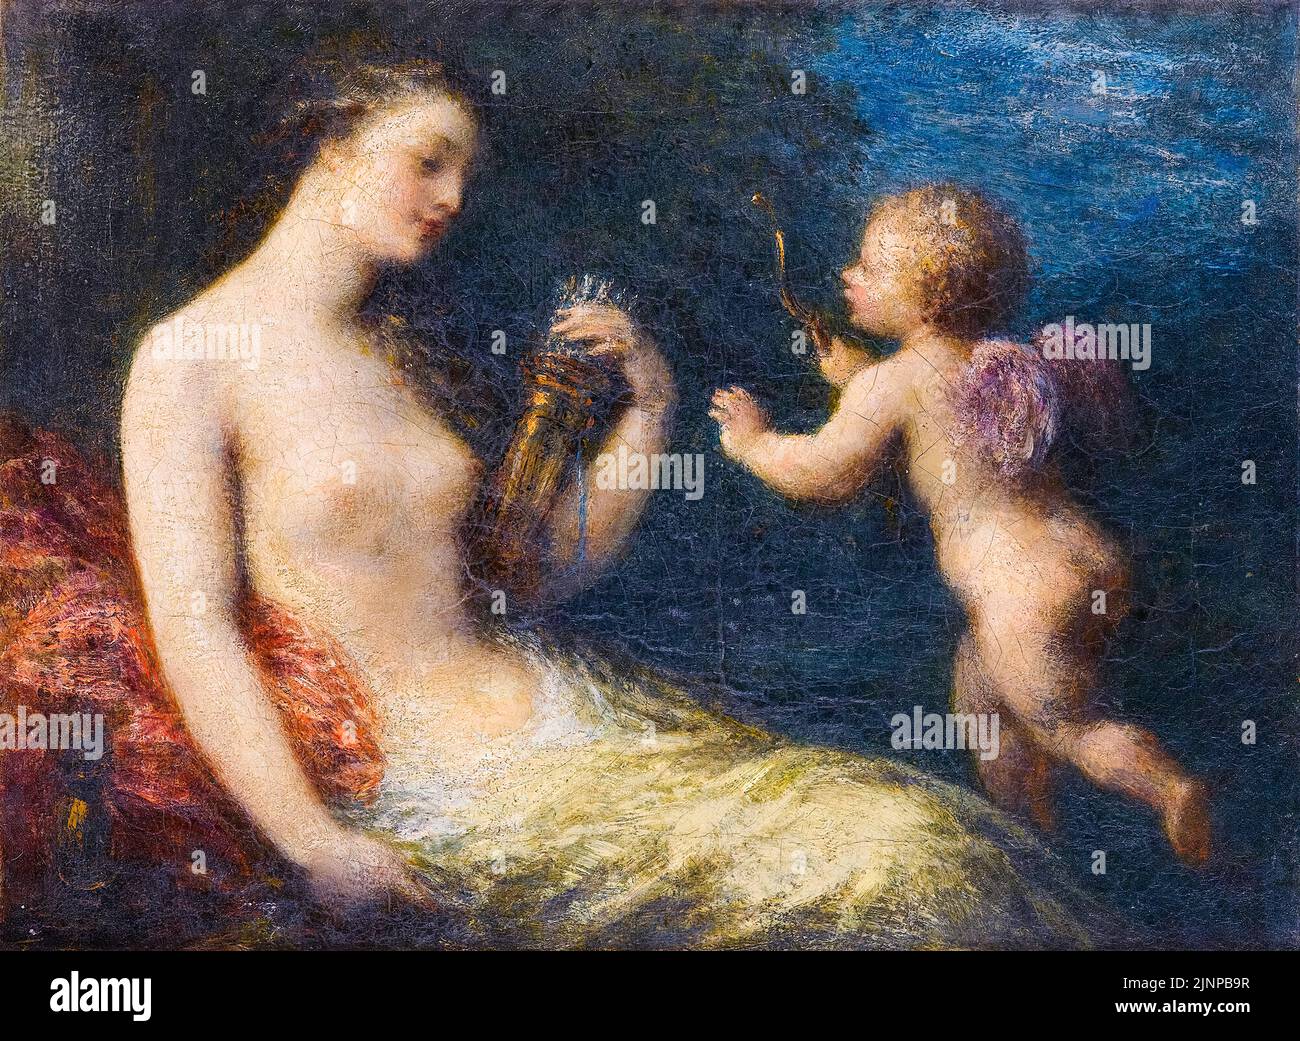 Venus And Cupid, painting in oil on canvas by Henri Fantin Latour, 1885 Stock Photo